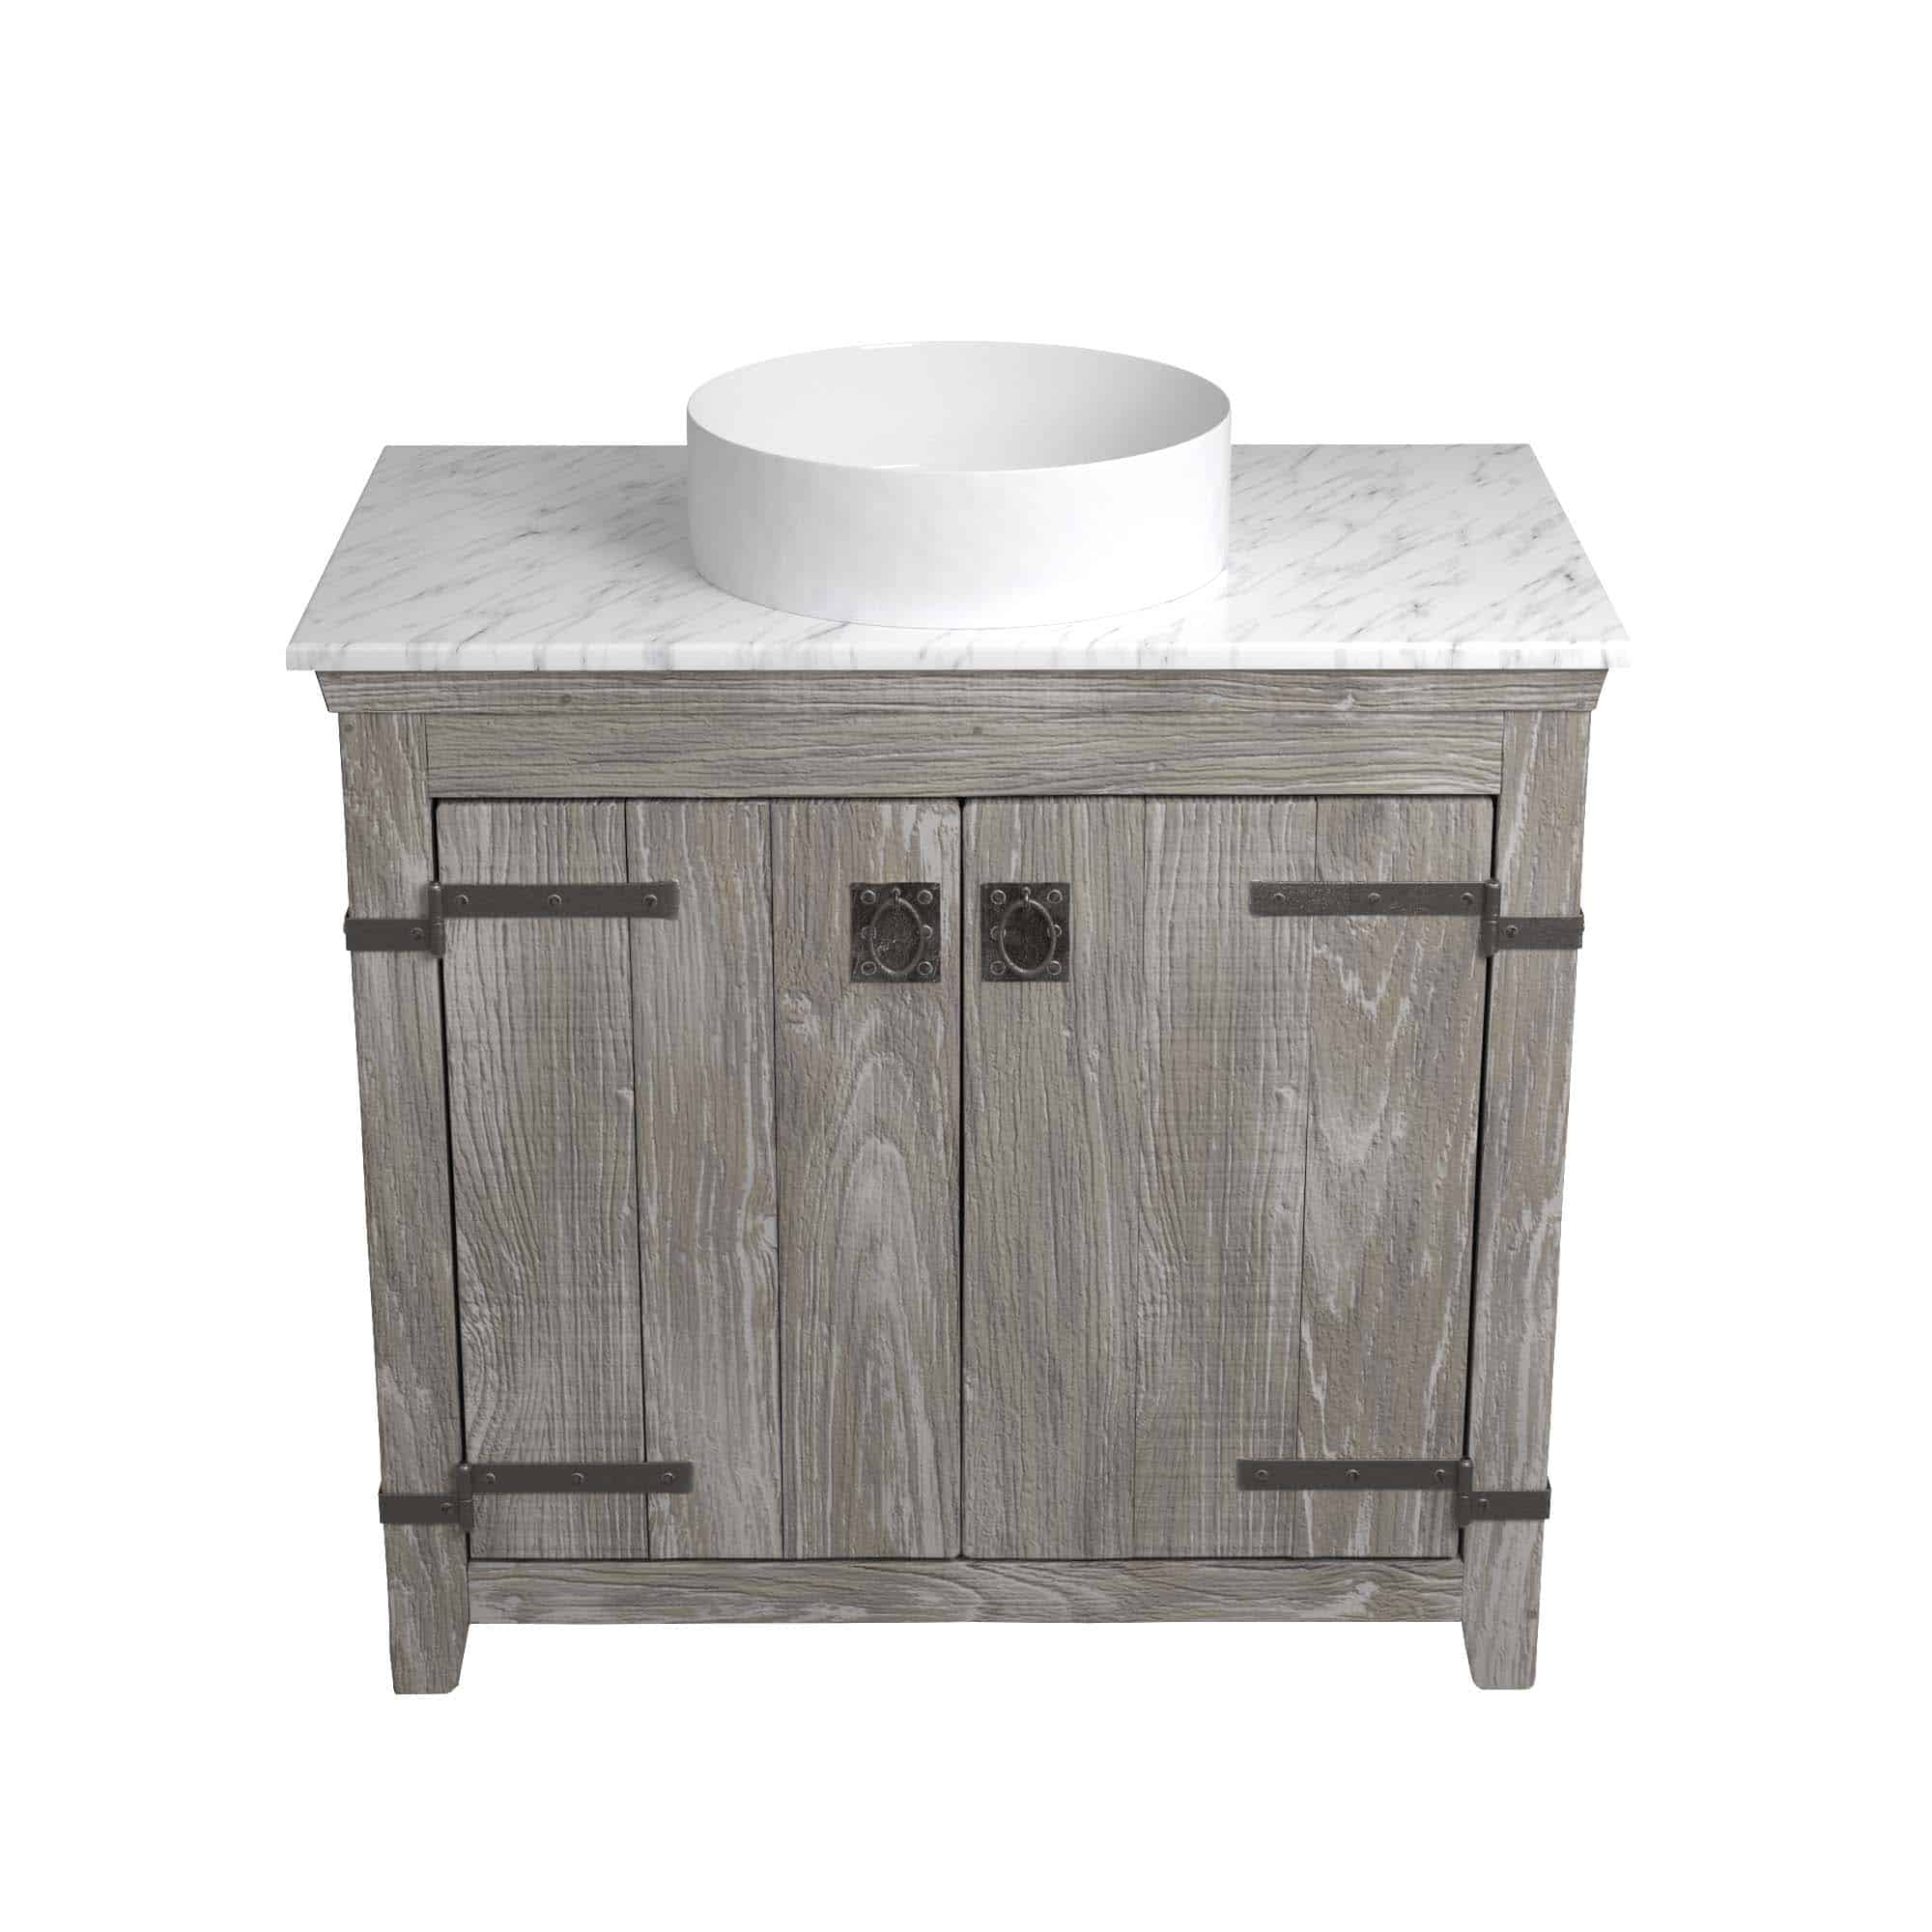 Native Trails 36" Americana Vanity in Driftwood with Carrara Marble Top and Positano in Bianco, Single Faucet Hole, BND36-VB-CT-MG-055